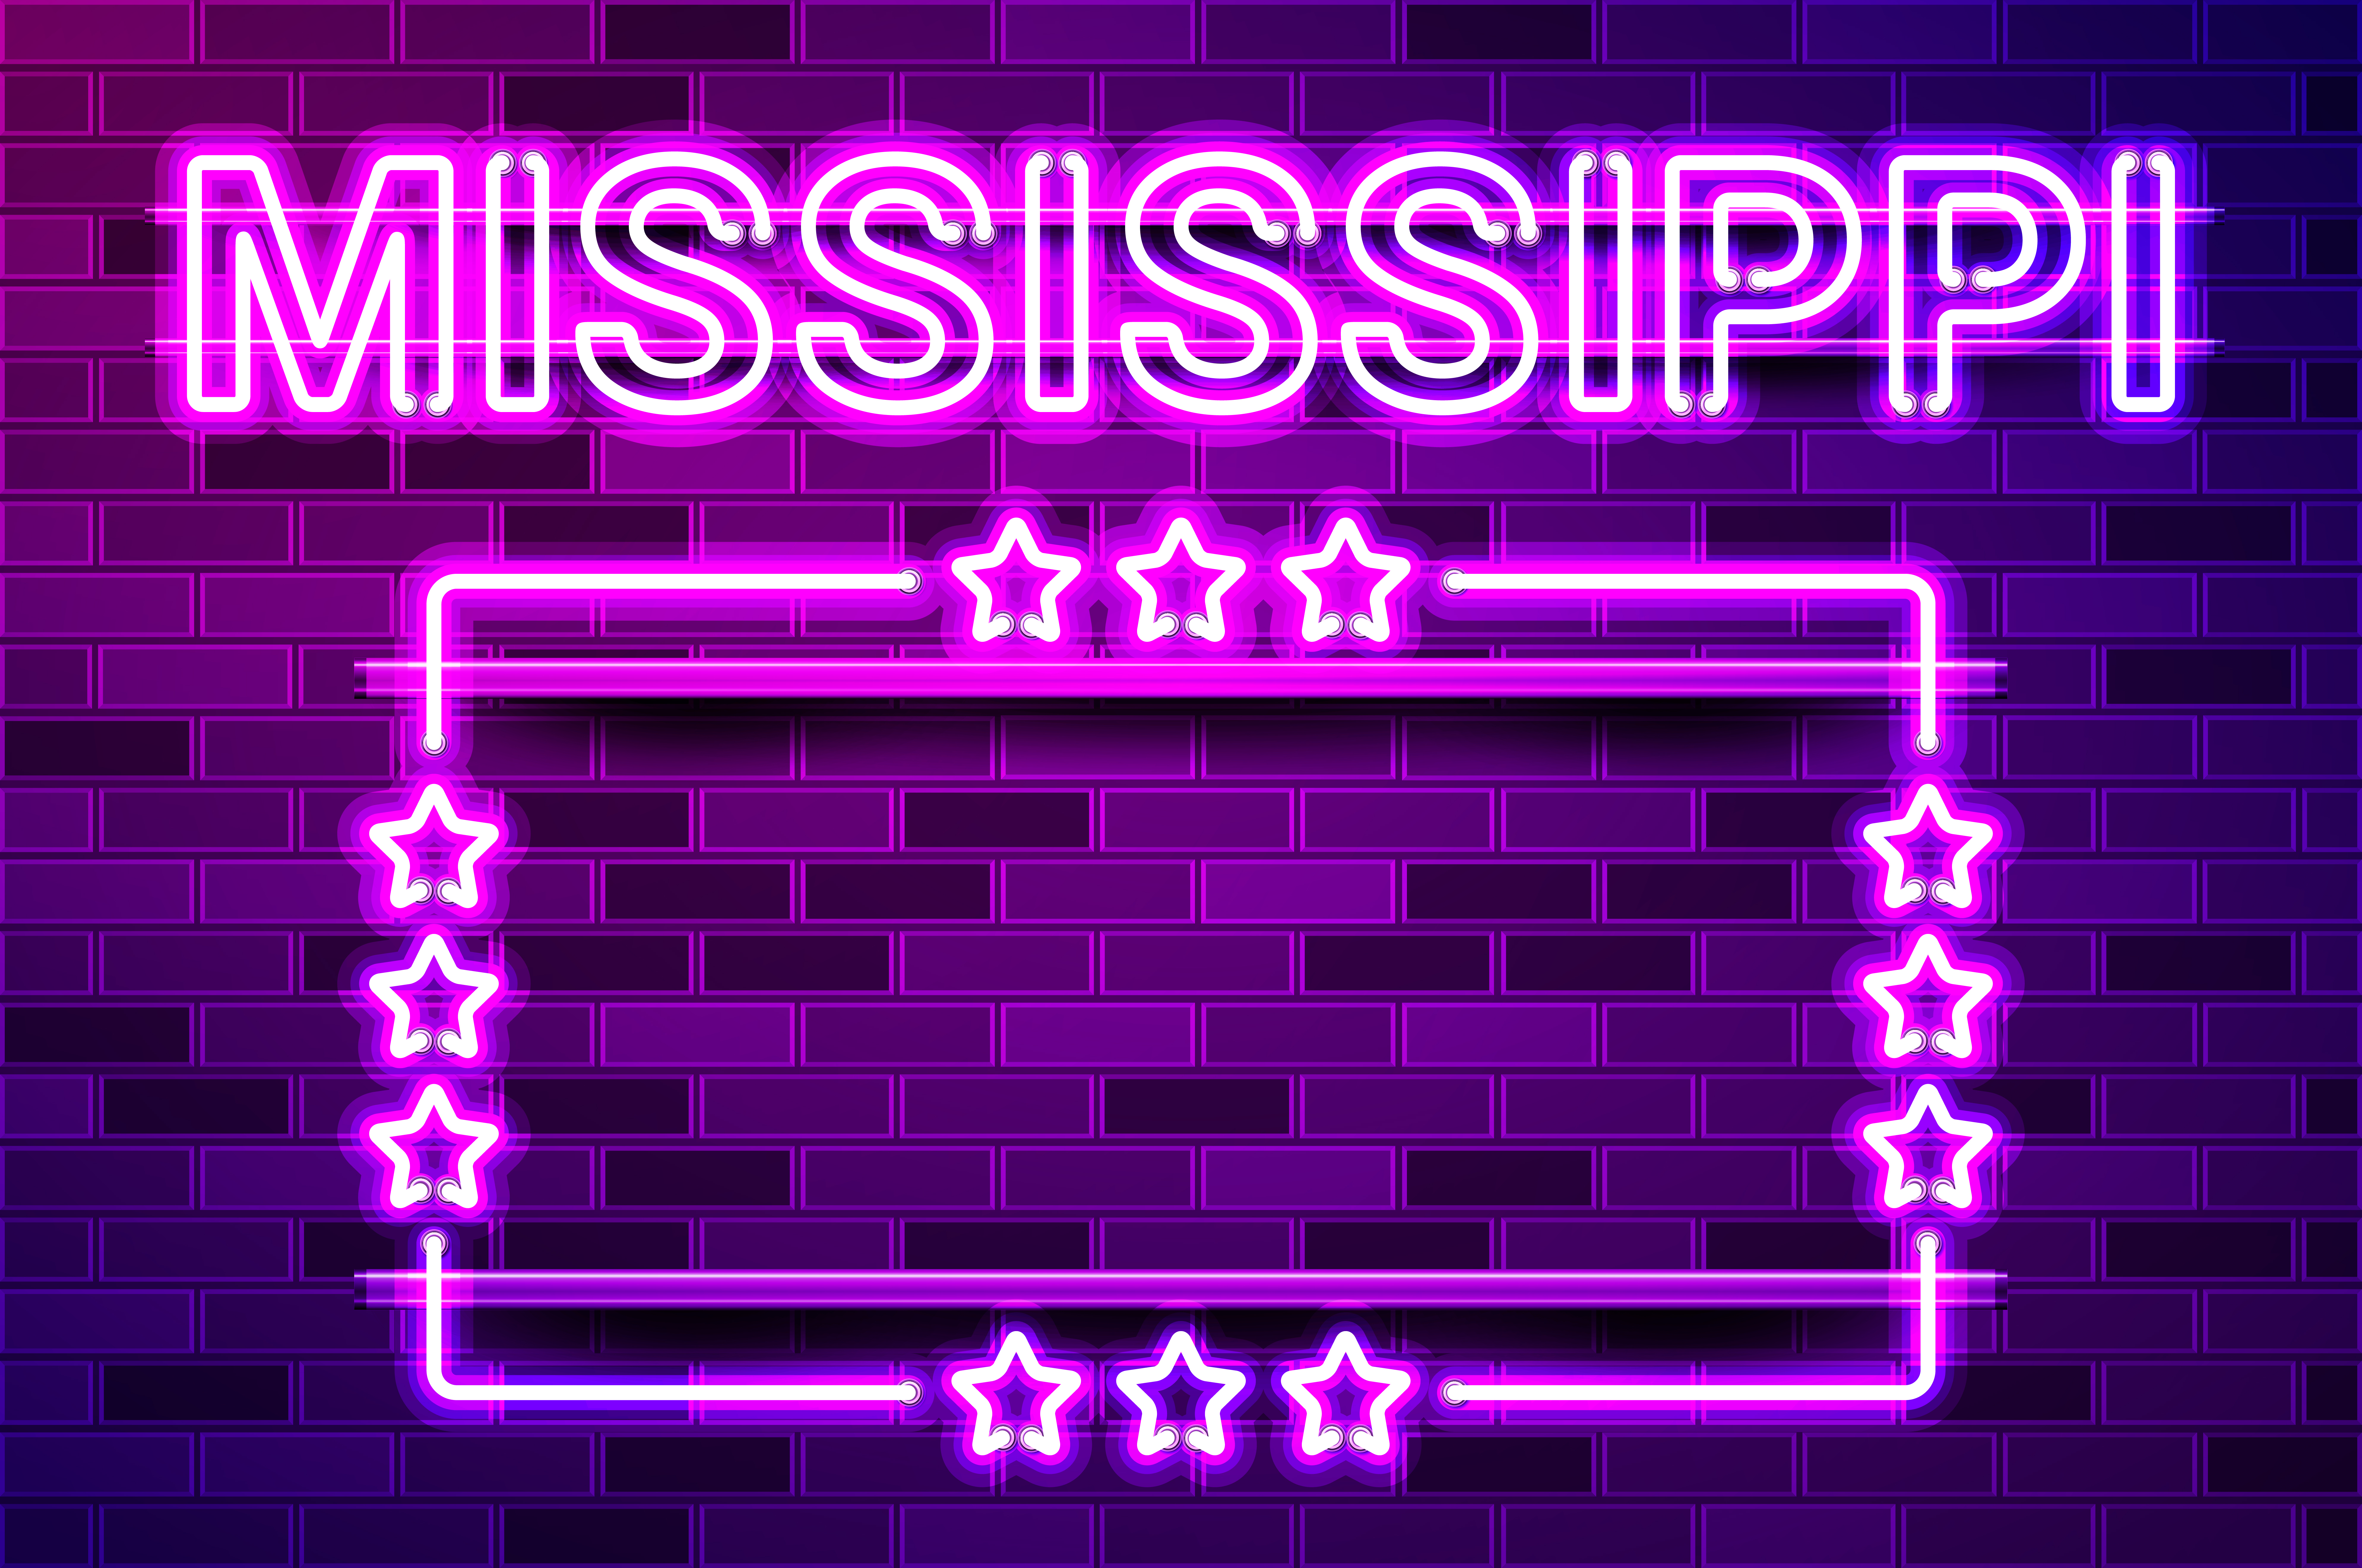 Mississippi US State glowing purple neon lettering and a rectangular frame with stars. Realistic vector illustration. Purple brick wall, violet glow, metal holders.. Mississippi US State glowing purple neon lettering and a rectangular frame with stars